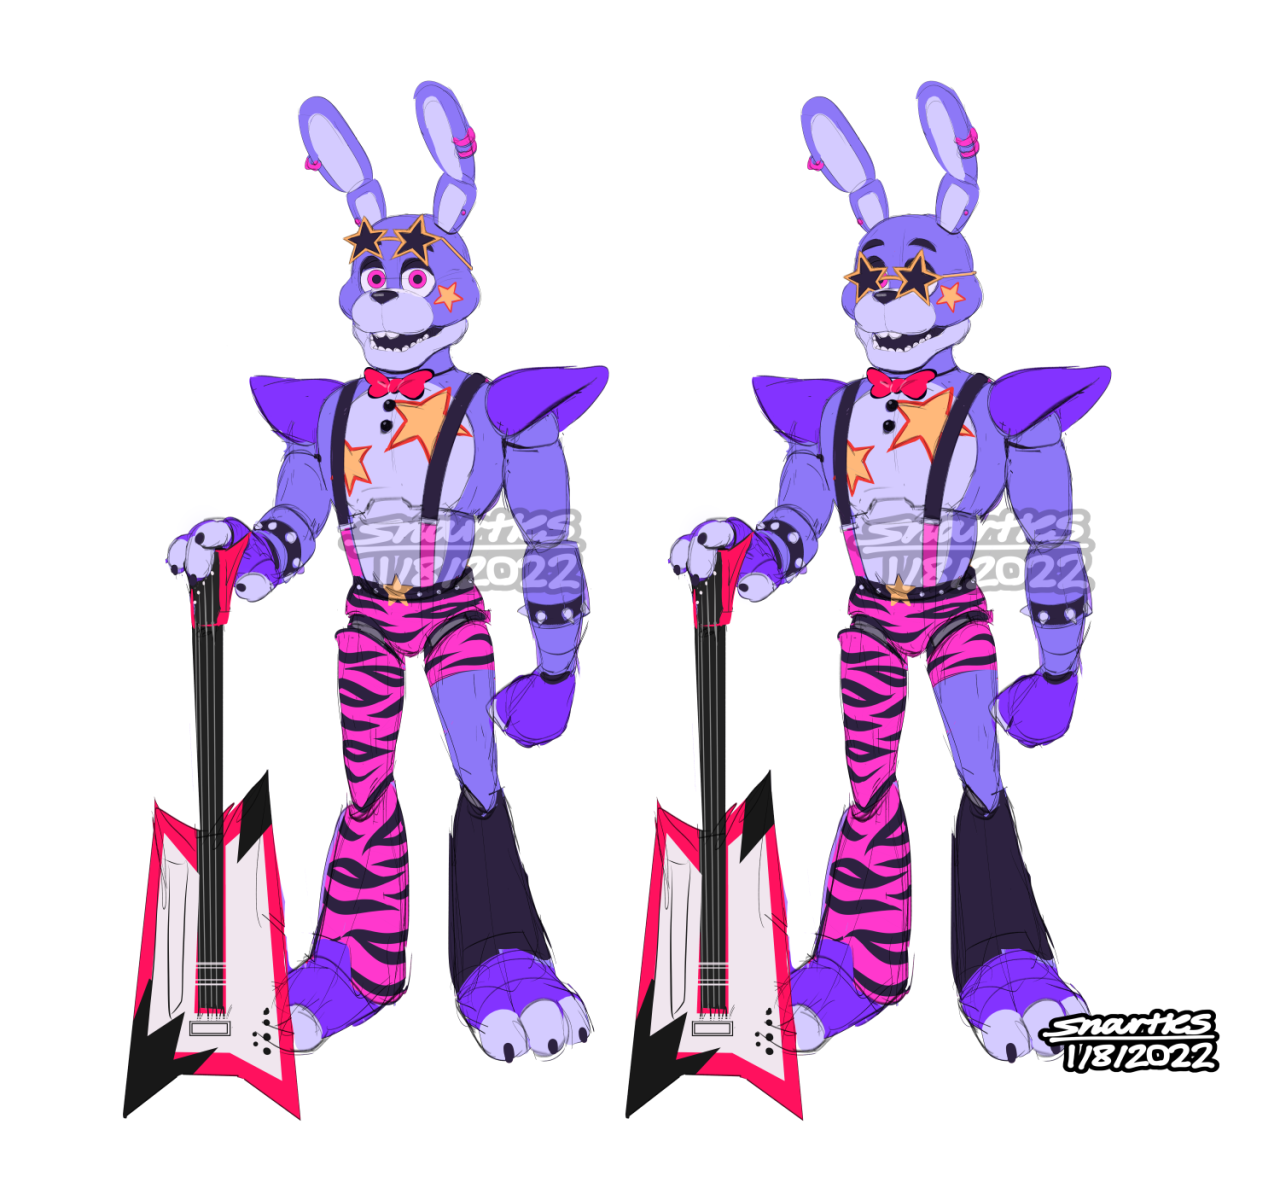 Art and Fart — haven't uploaded this yet here, my glamrock Bonnie